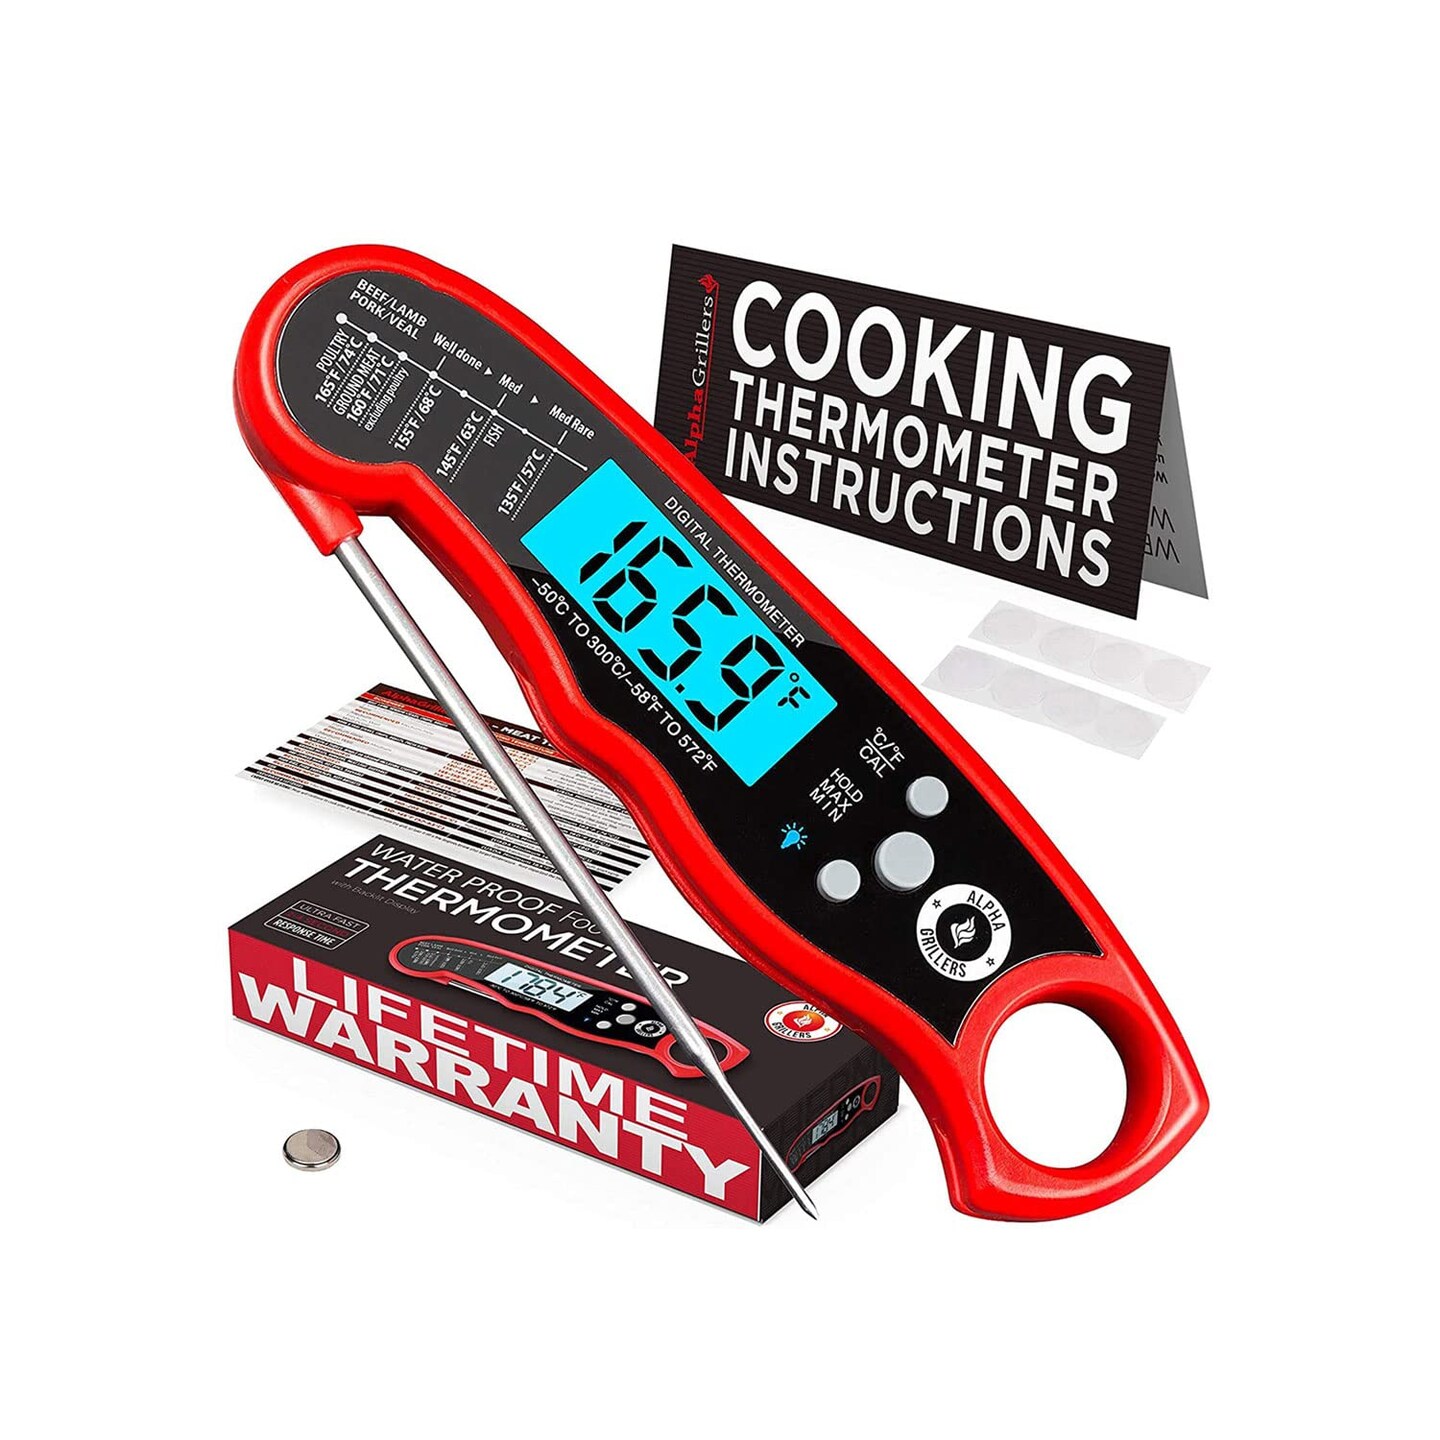 Digital Meat Thermometer for BBQ Cooking and Grilling